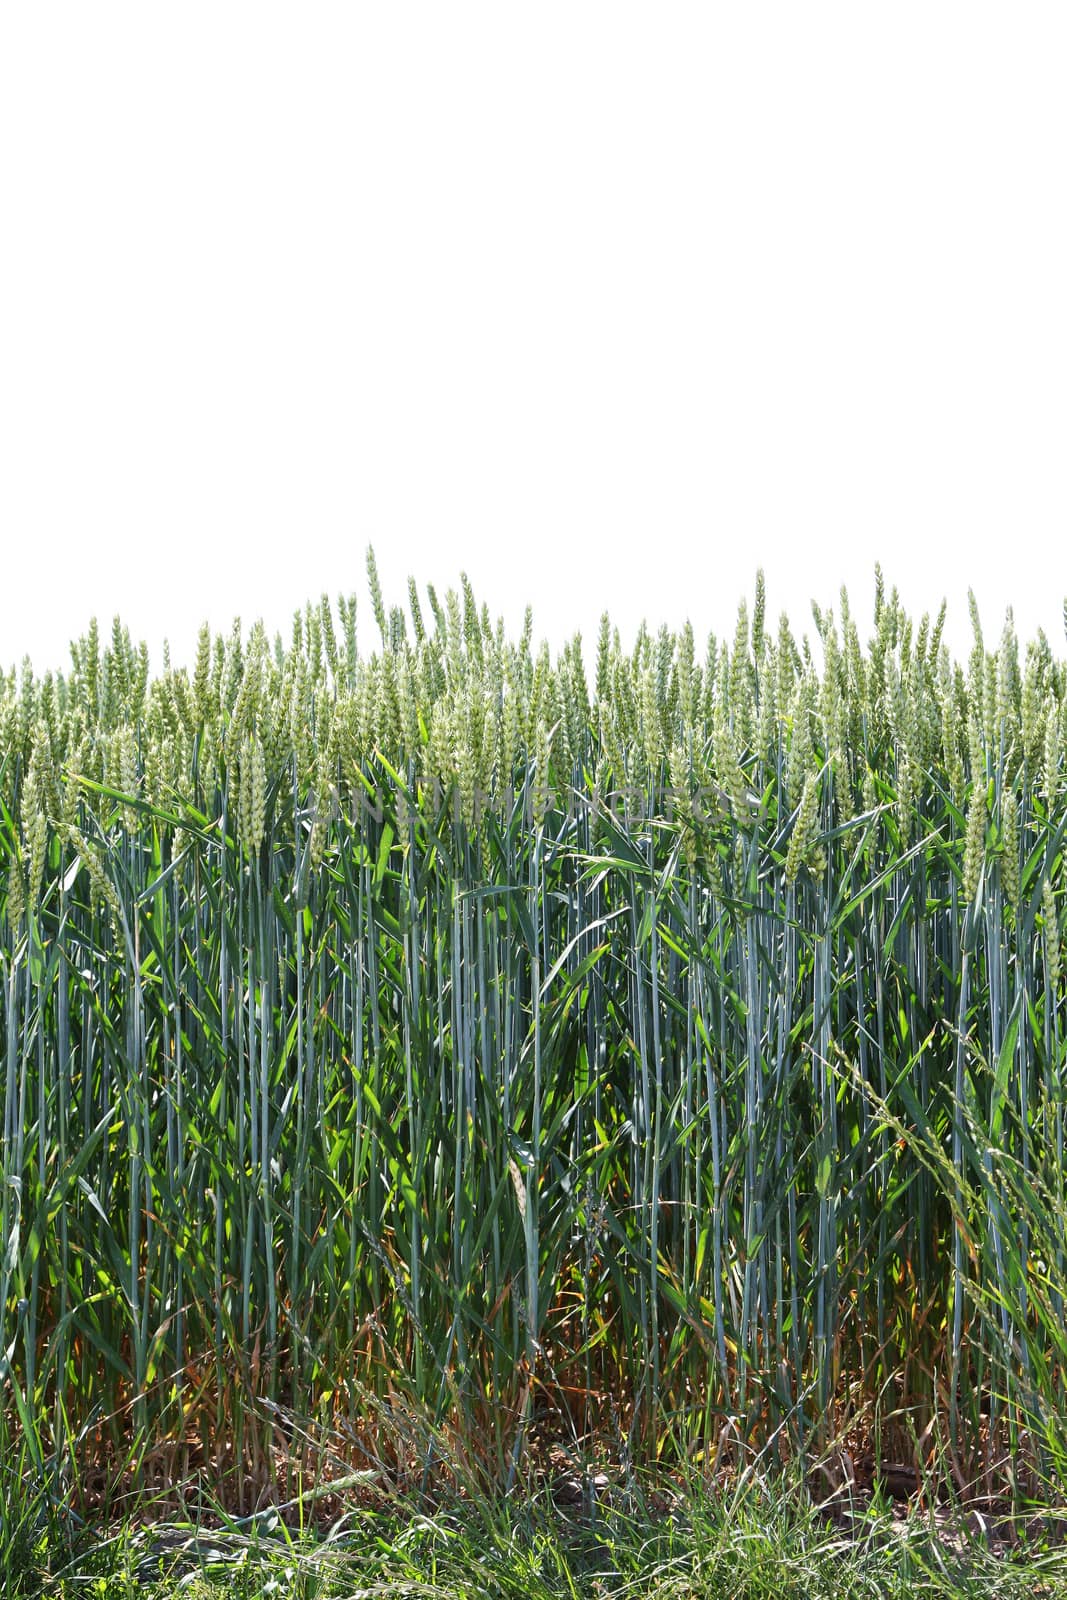 An image of a typical wheat field background